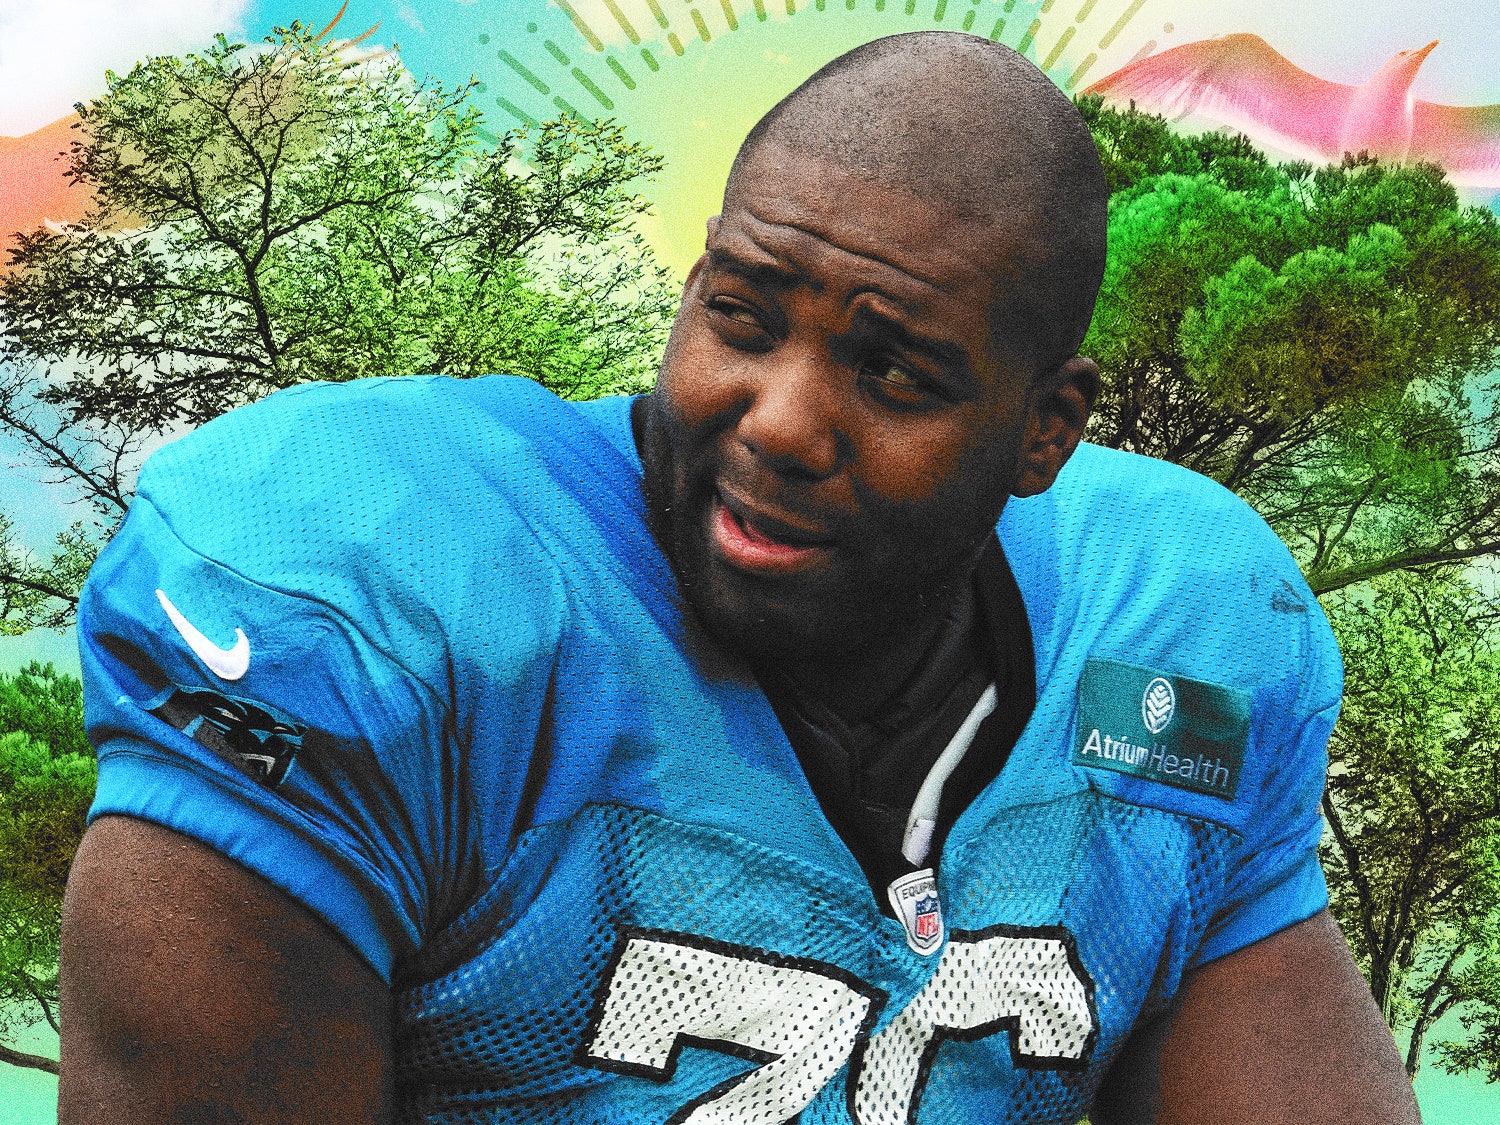 Former NFL Player Russell Okung Explains How He Lost Over 100 Pounds on a 40-Day Water-Only Fast